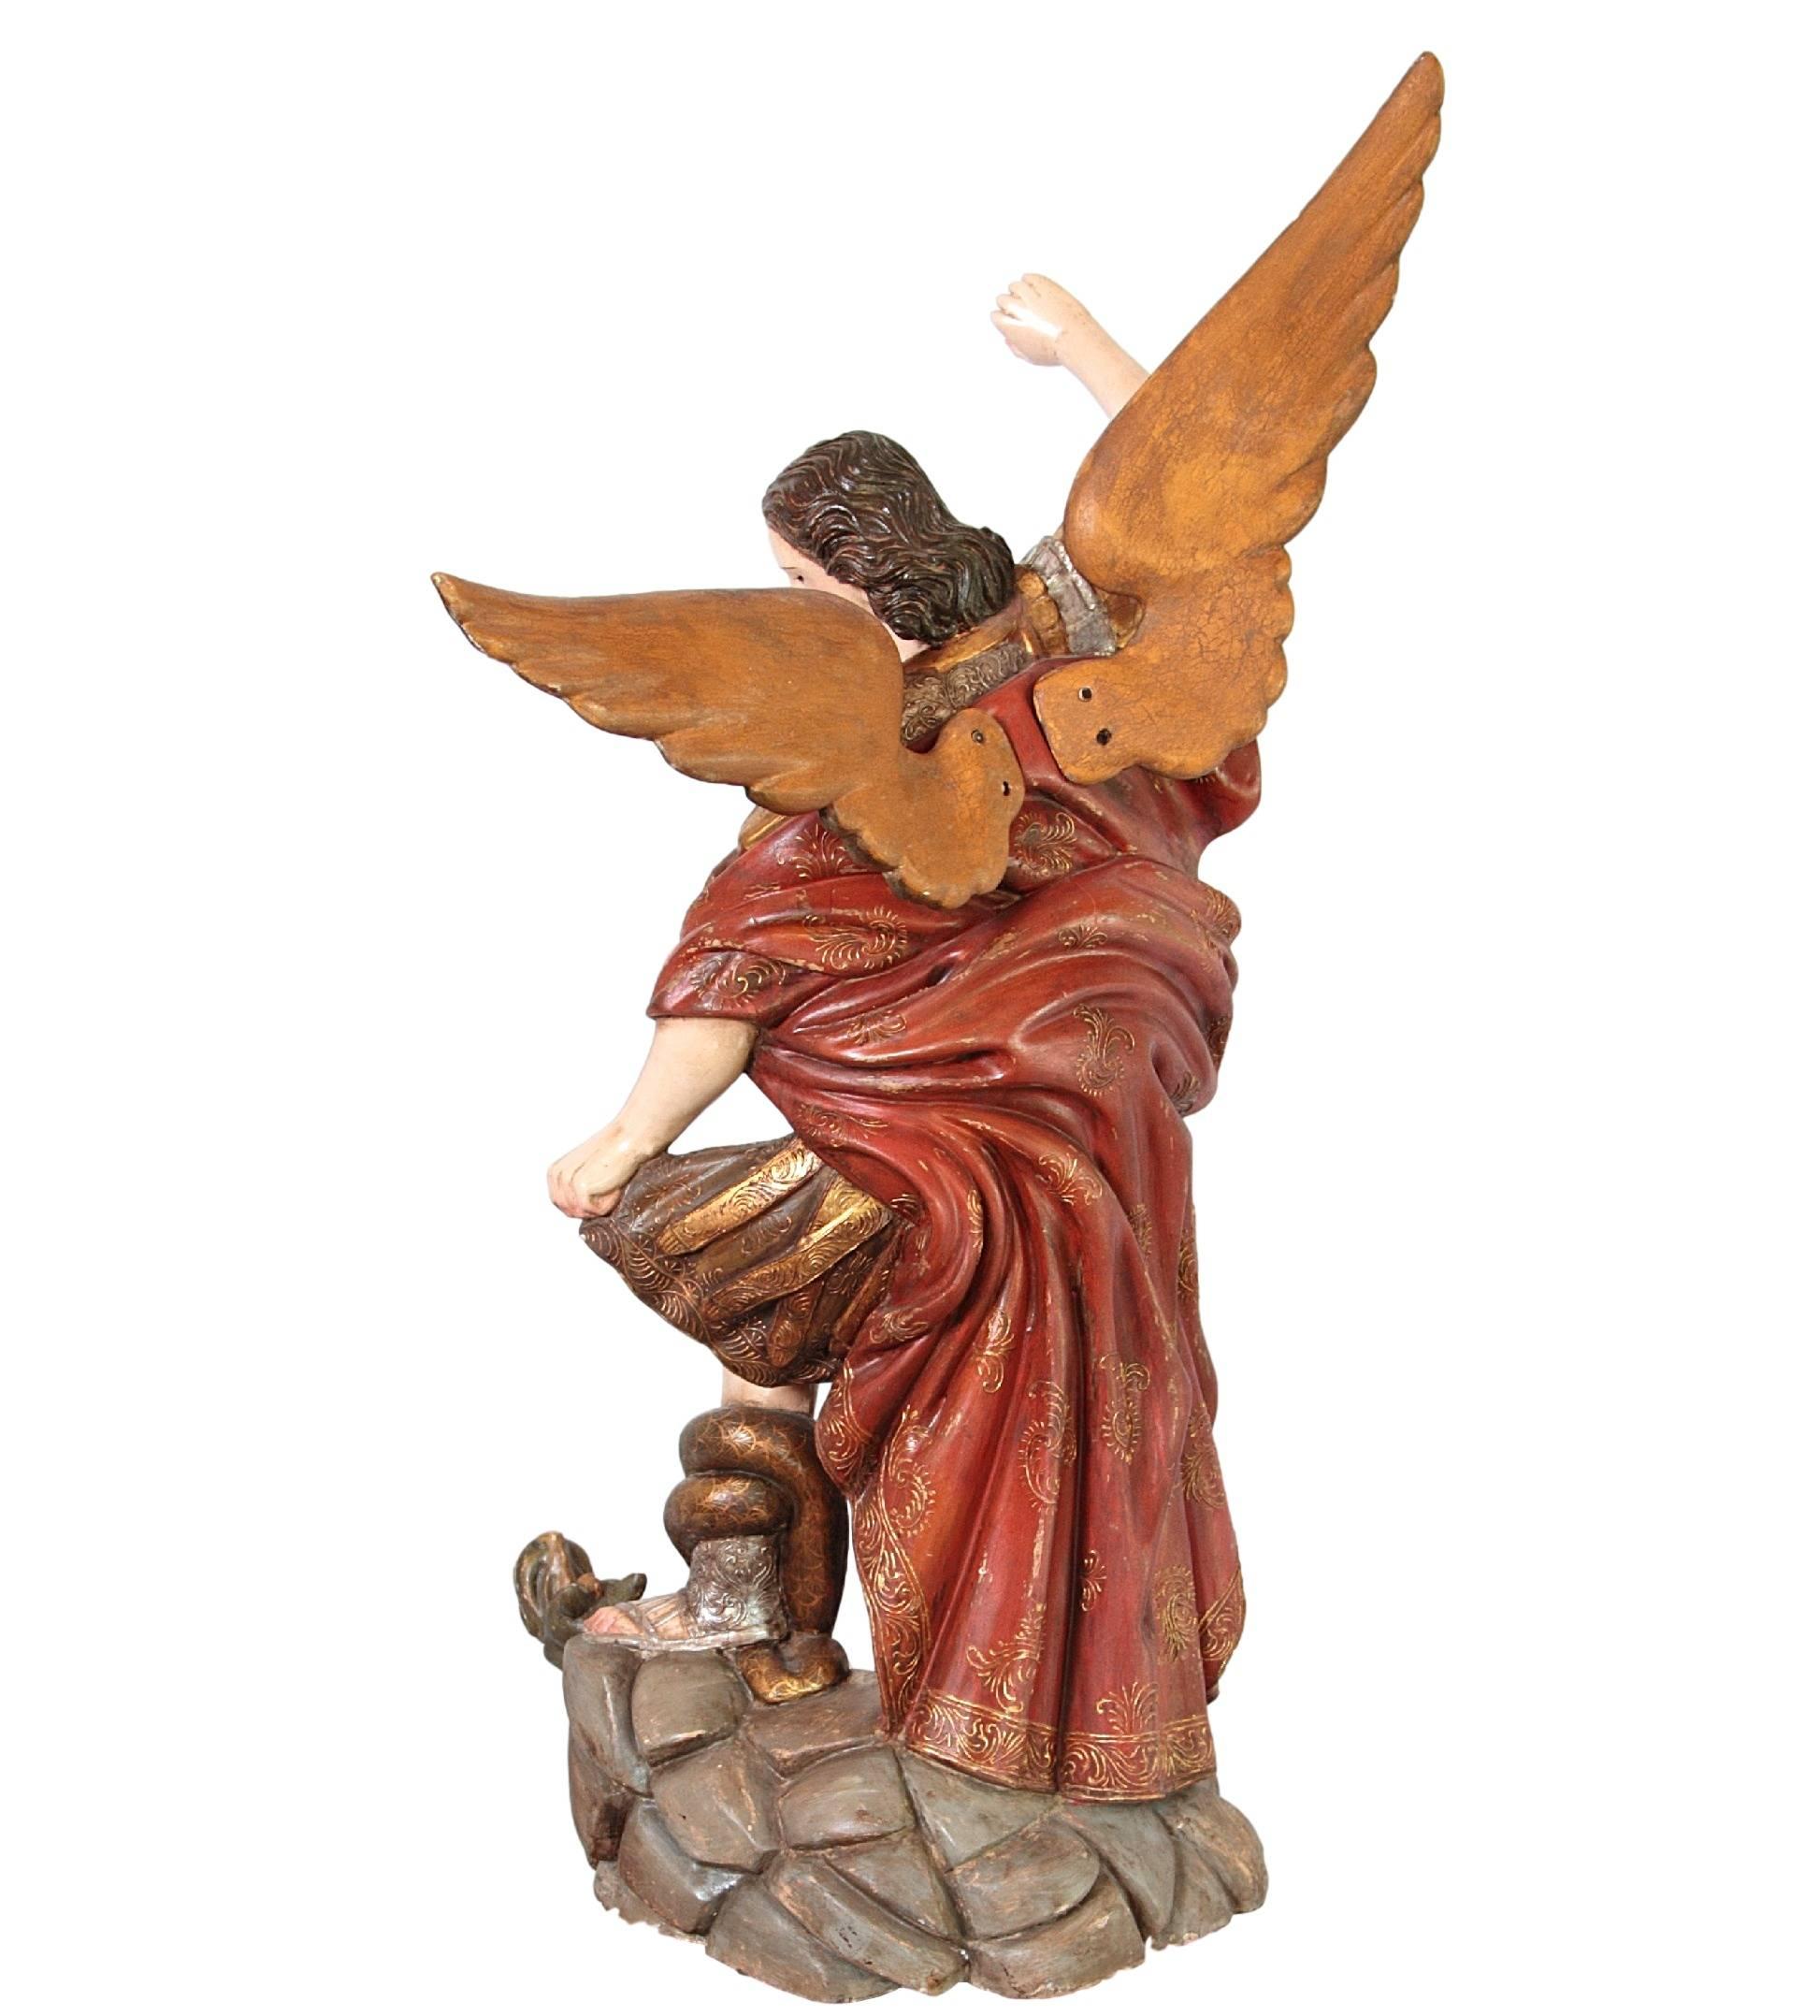 A breathtaking depiction of Saint Michael the Archangel slaying the dragon. The beautiful coloring of the armor and elaborate follow through of the body give this figurine a very vivid character. The Holy Scripture describes Saint Michael as 